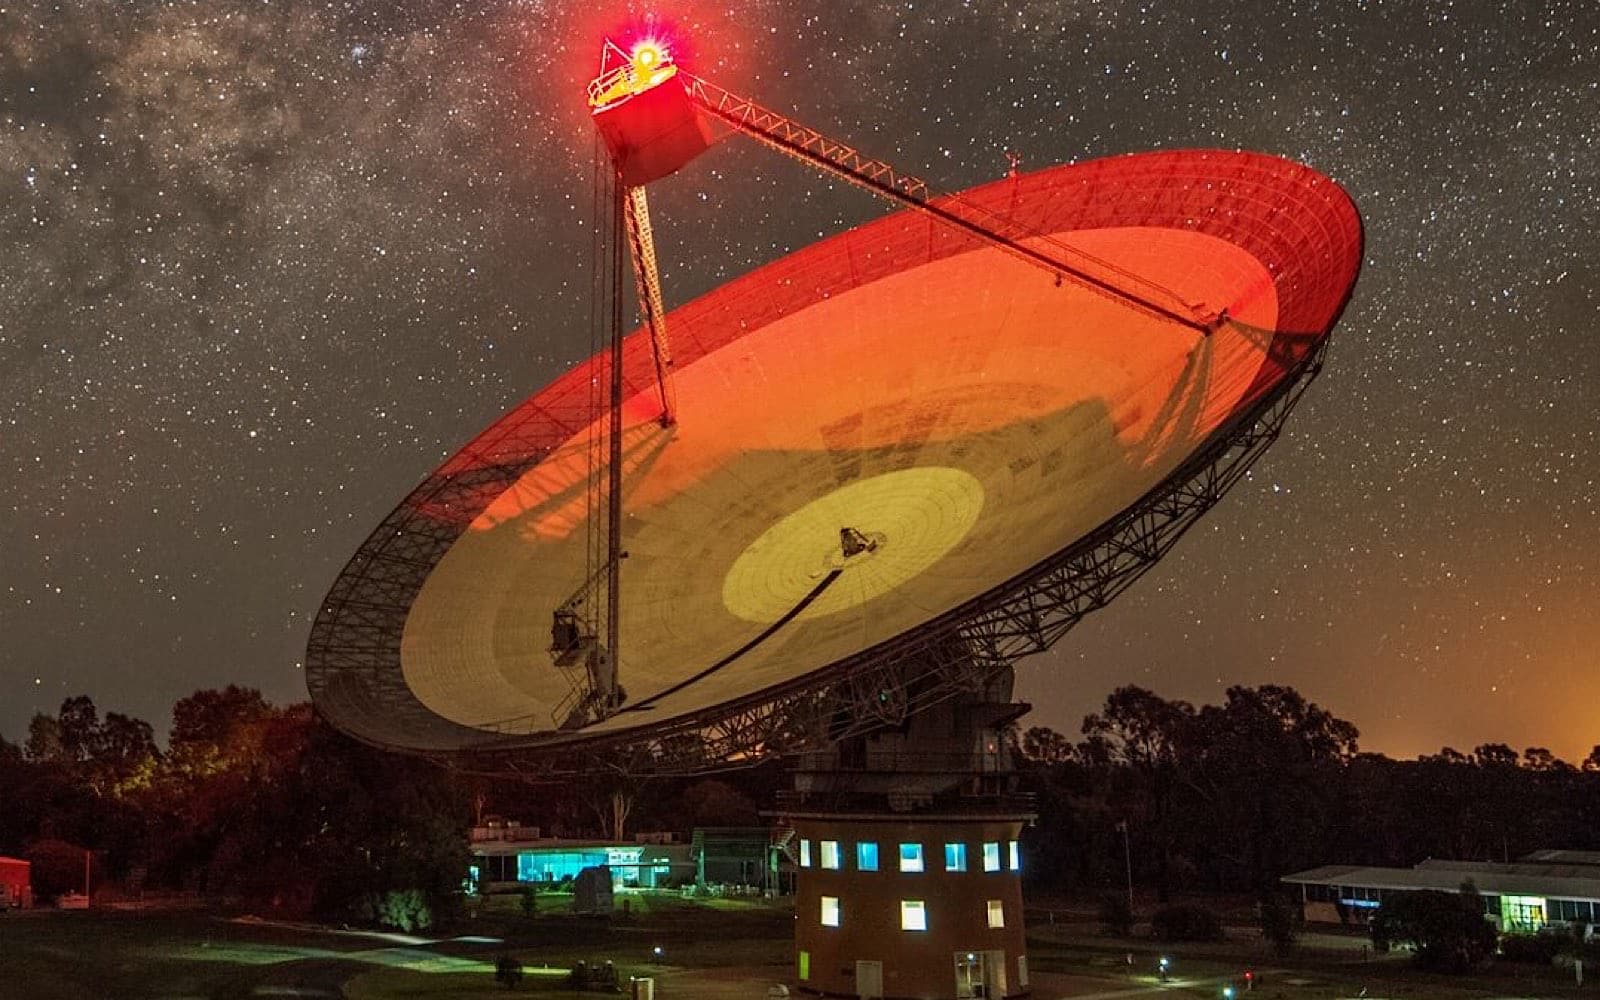 The Parkes radio telescope, also known as "The Dish".